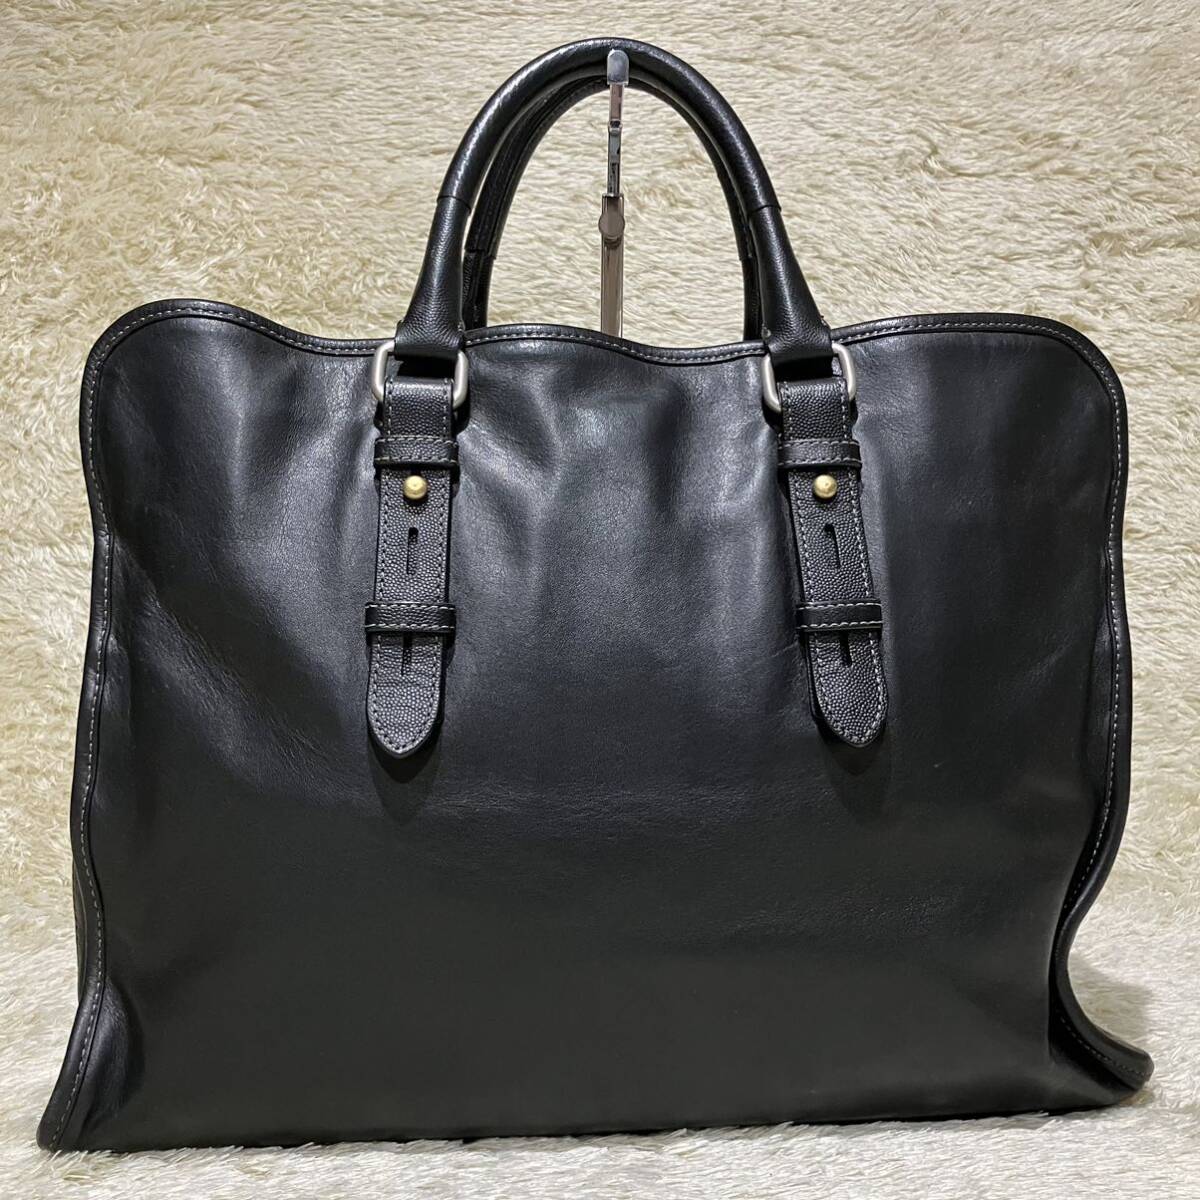 1 jpy start beautiful goods Paul Smith Paul Smith business bag briefcase tote bag men's A4 leather original leather black black document commuting bag 